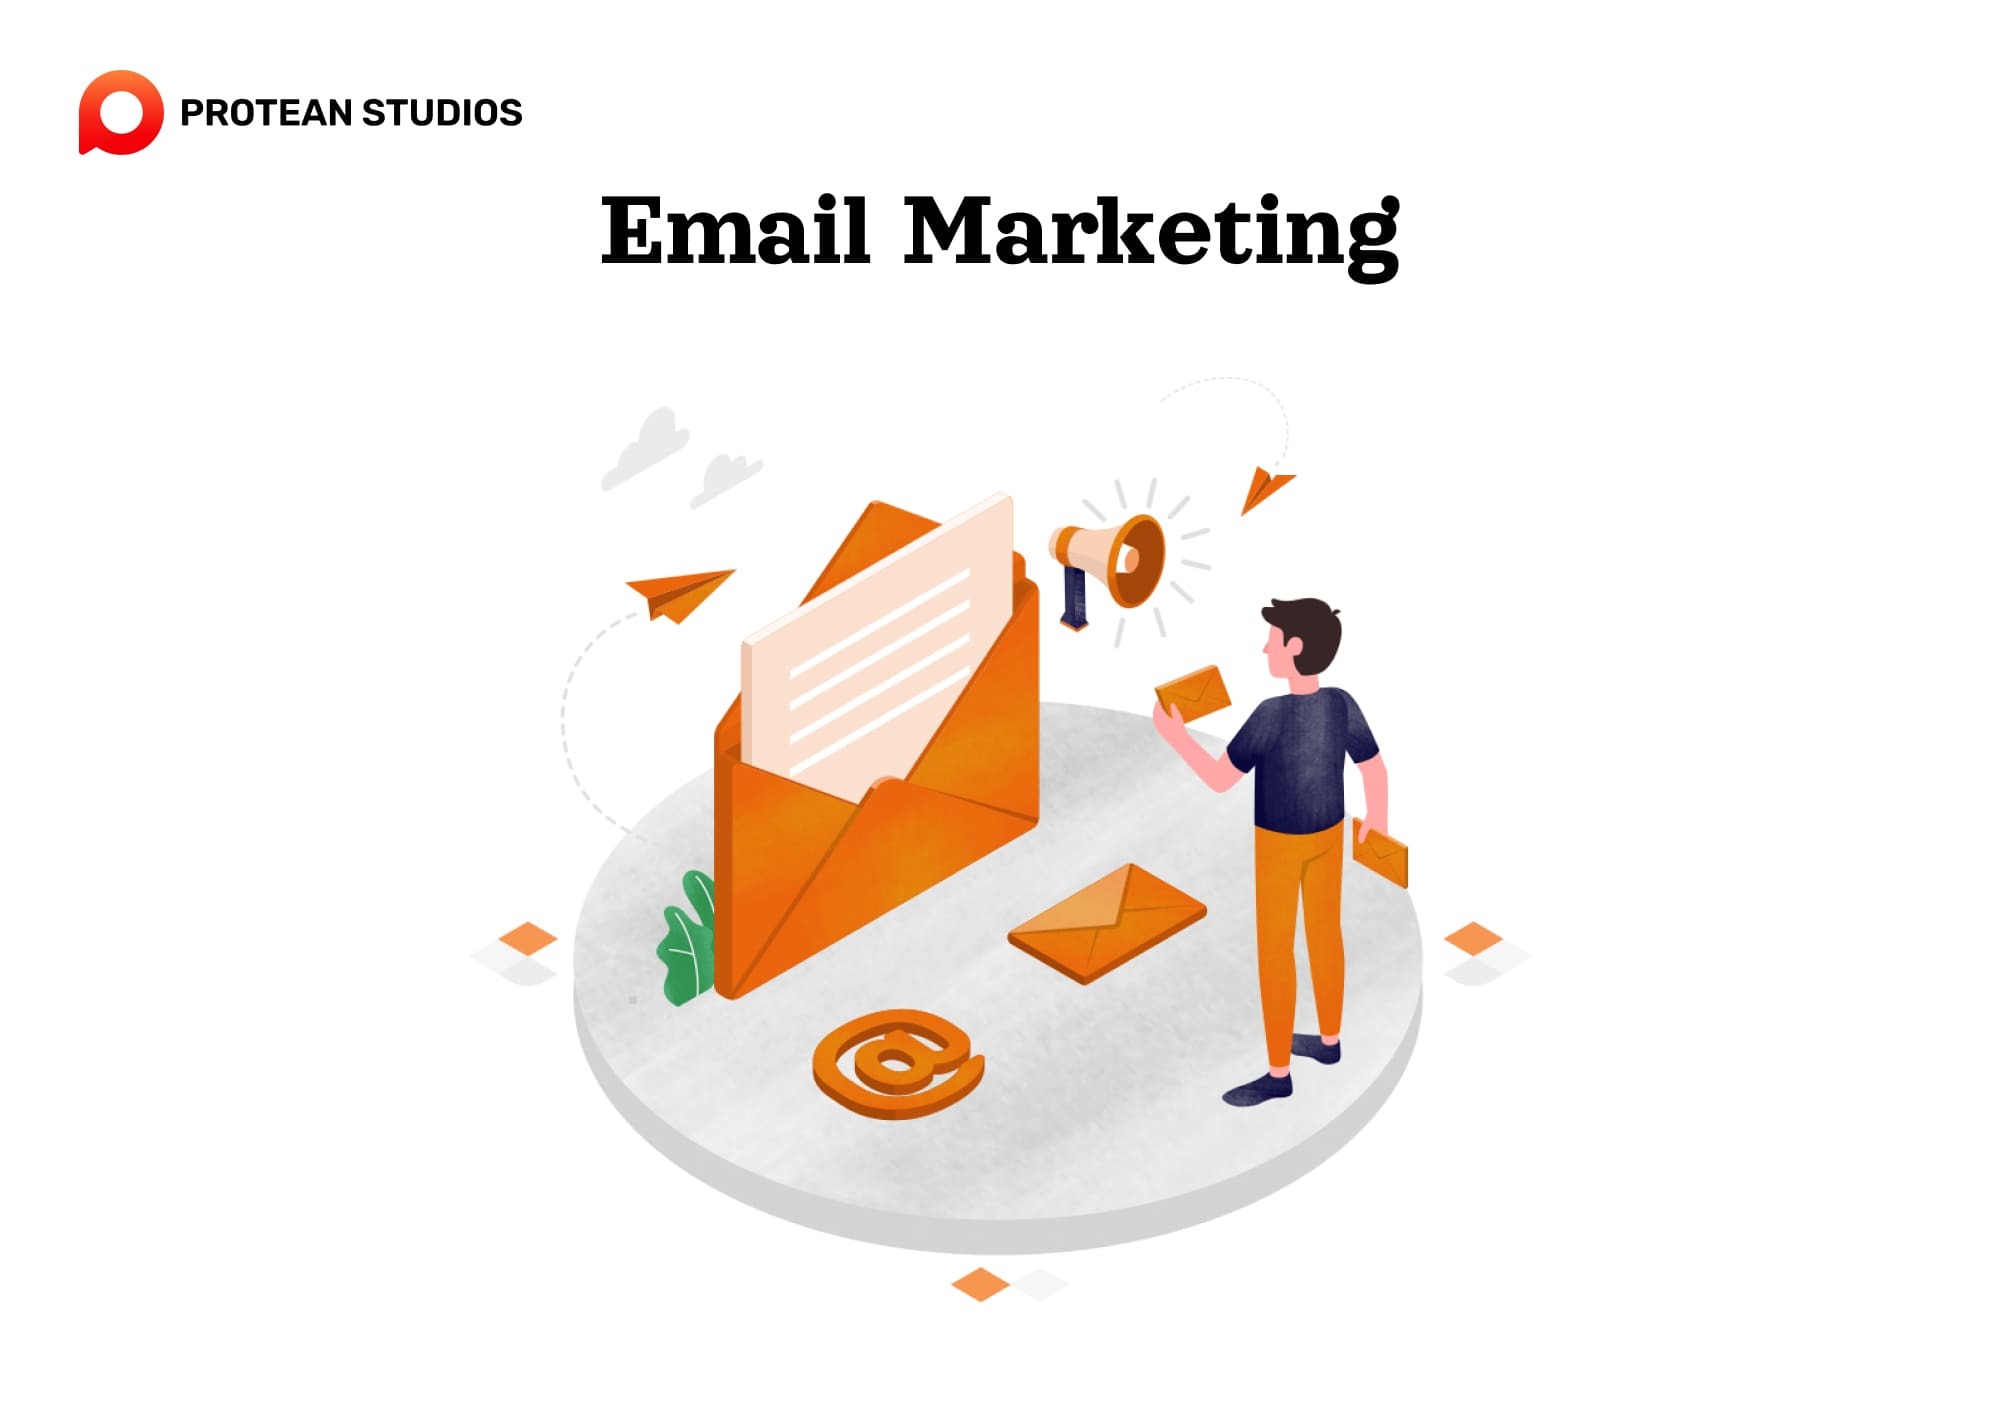 Some basic information about Email Marketing